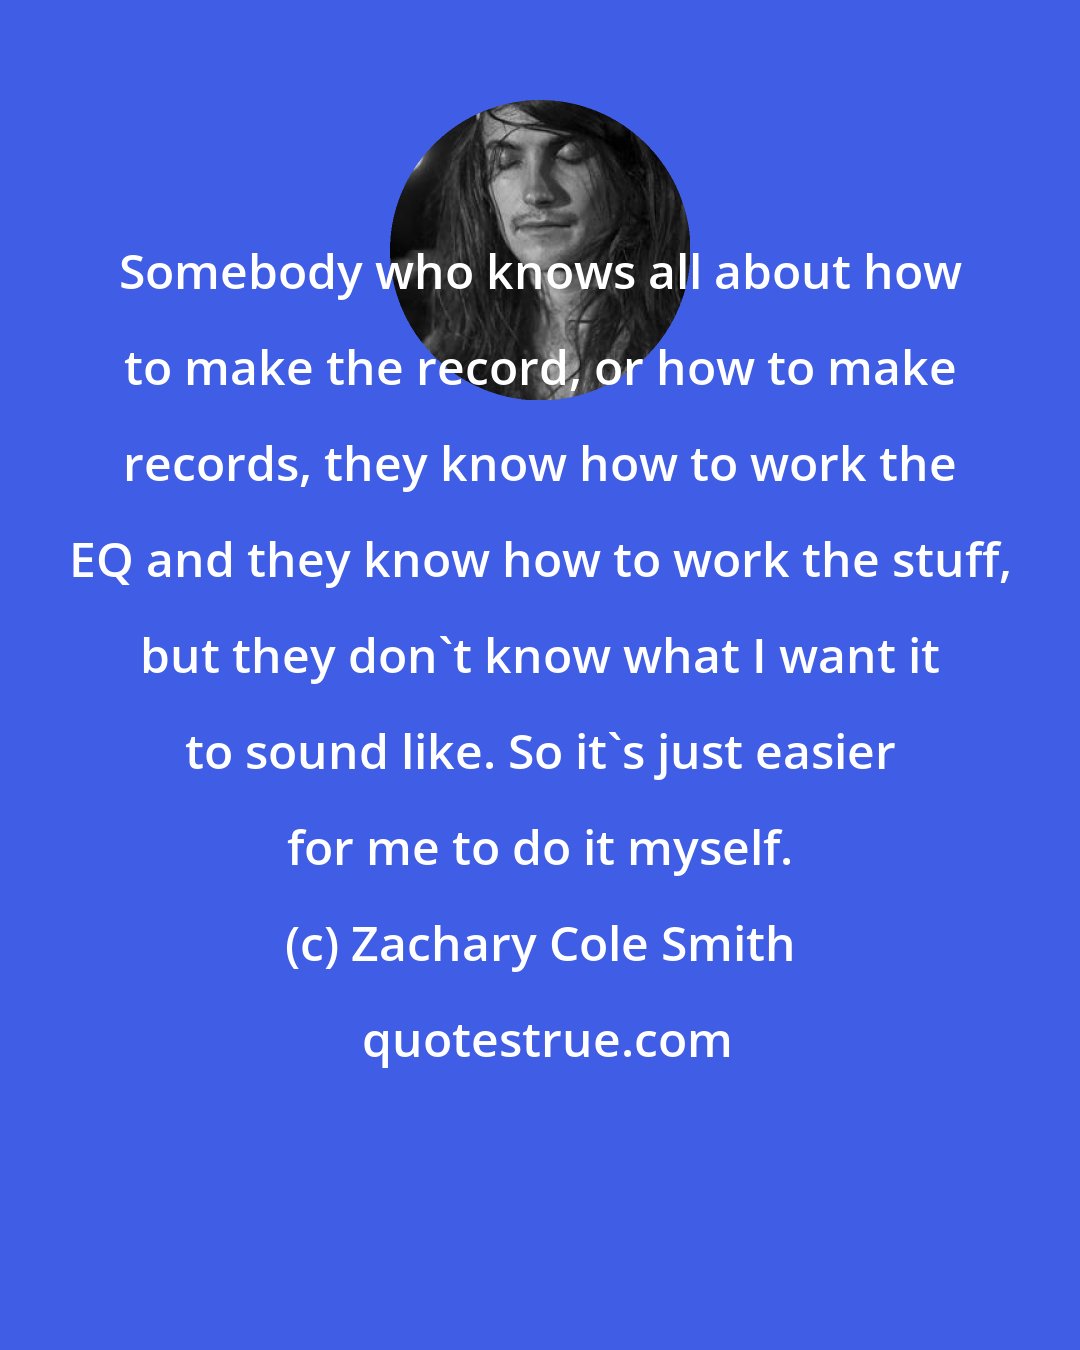 Zachary Cole Smith: Somebody who knows all about how to make the record, or how to make records, they know how to work the EQ and they know how to work the stuff, but they don't know what I want it to sound like. So it's just easier for me to do it myself.